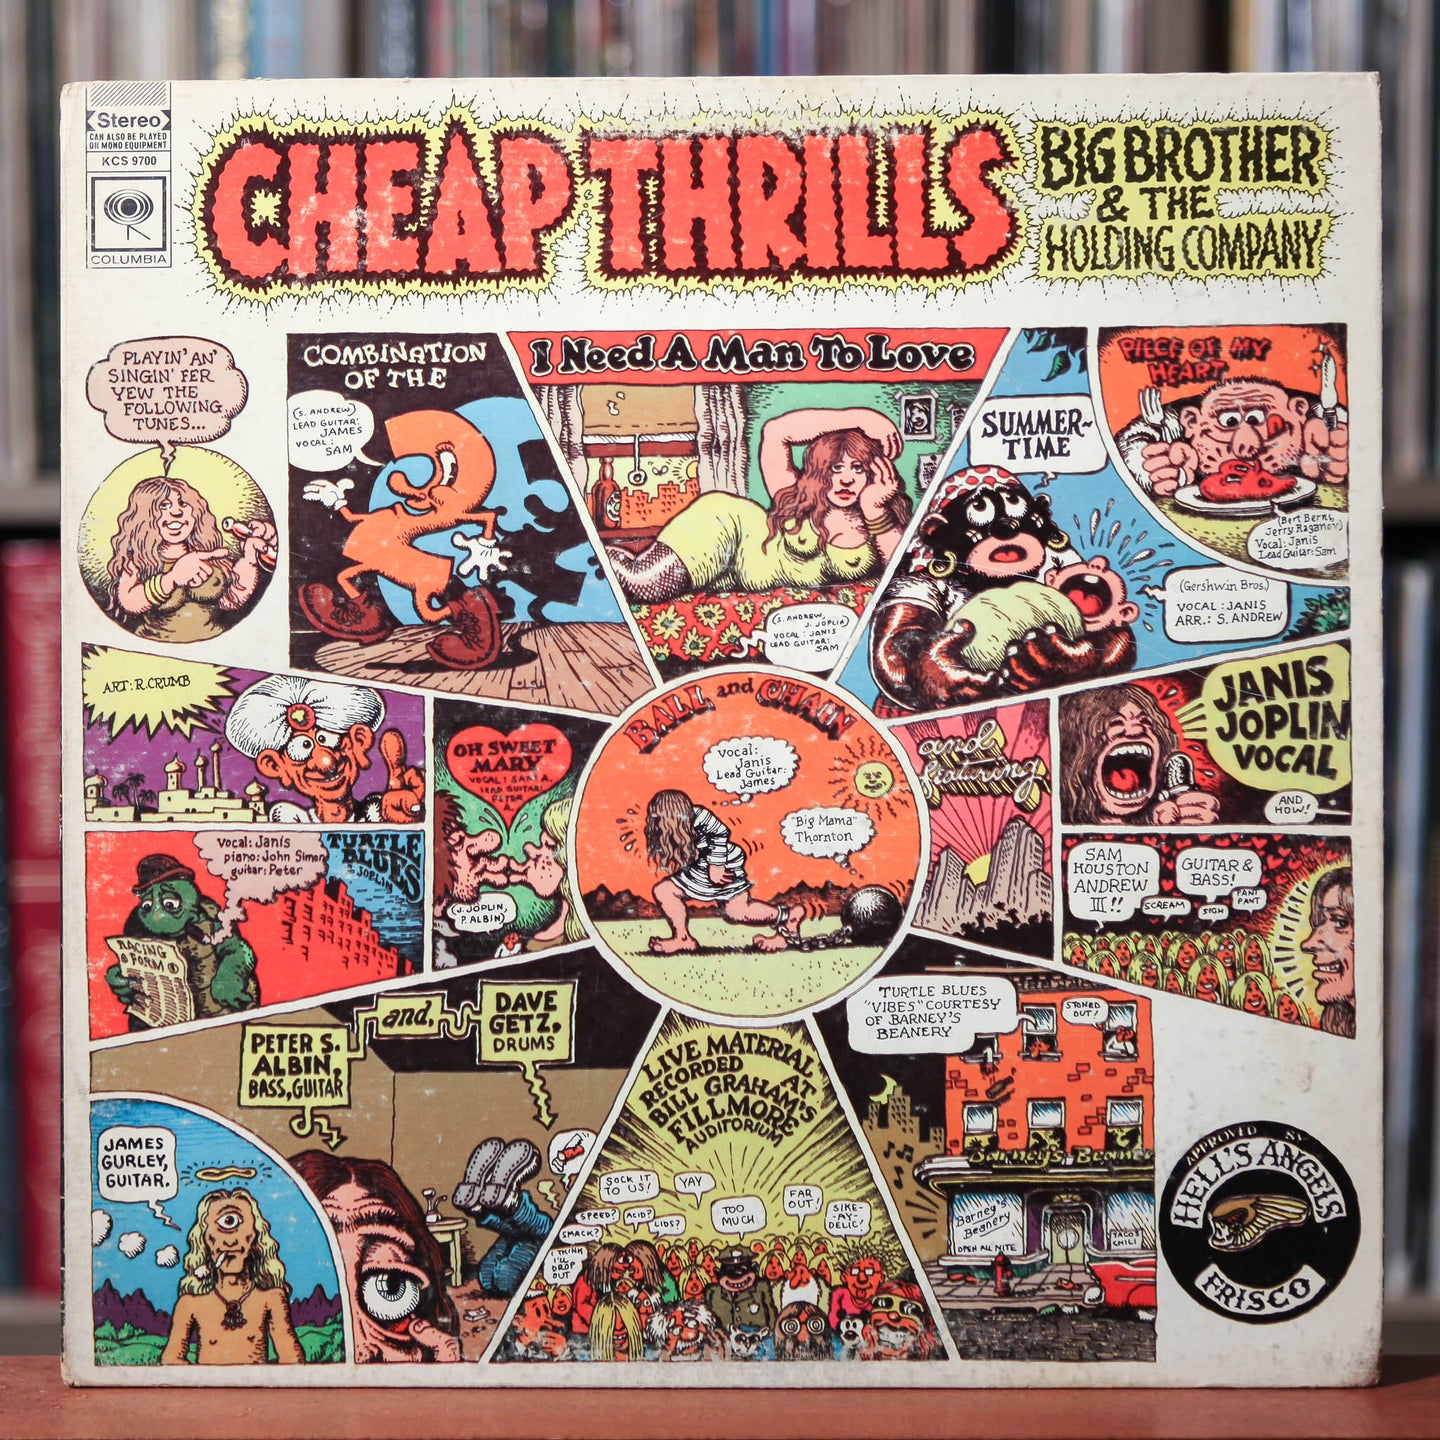 Big Brother and the Holding Company - Cheap Thrills - 1980 Columbia, VG+/VG